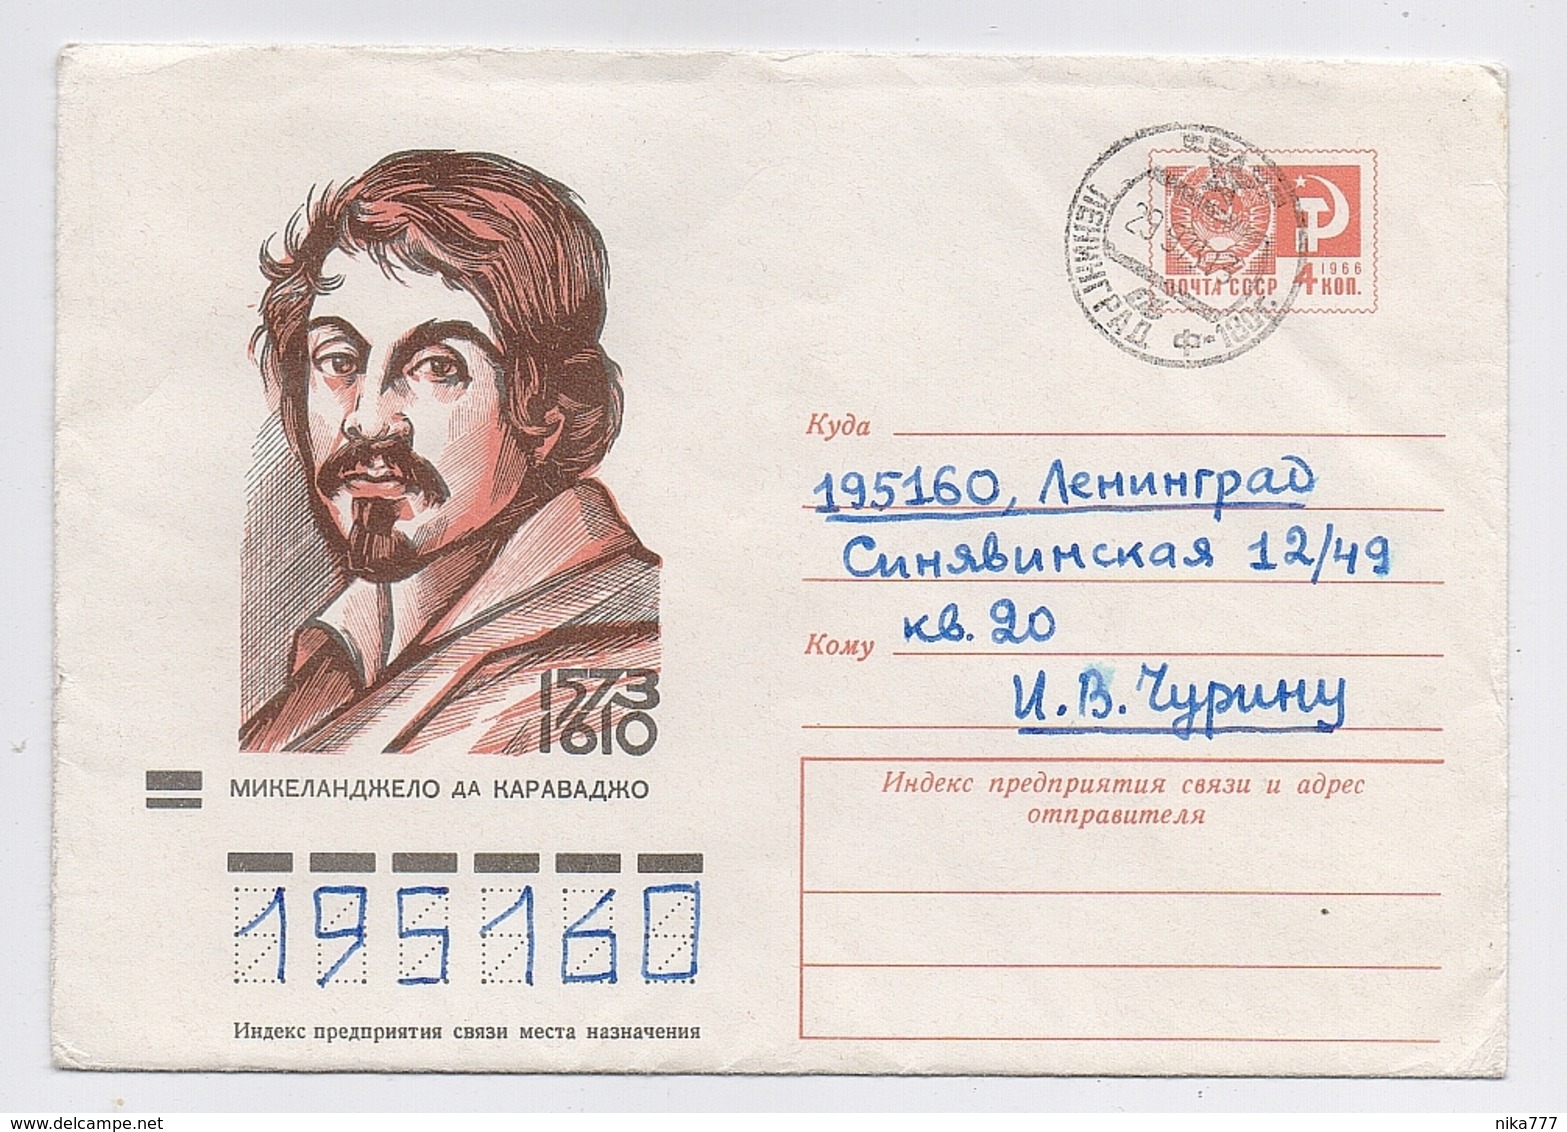 MAIL Post Stationery Cover Used USSR RUSSIA Art Painting Italy MICHELANDGELO Caravaggio Leningrad - Lettres & Documents